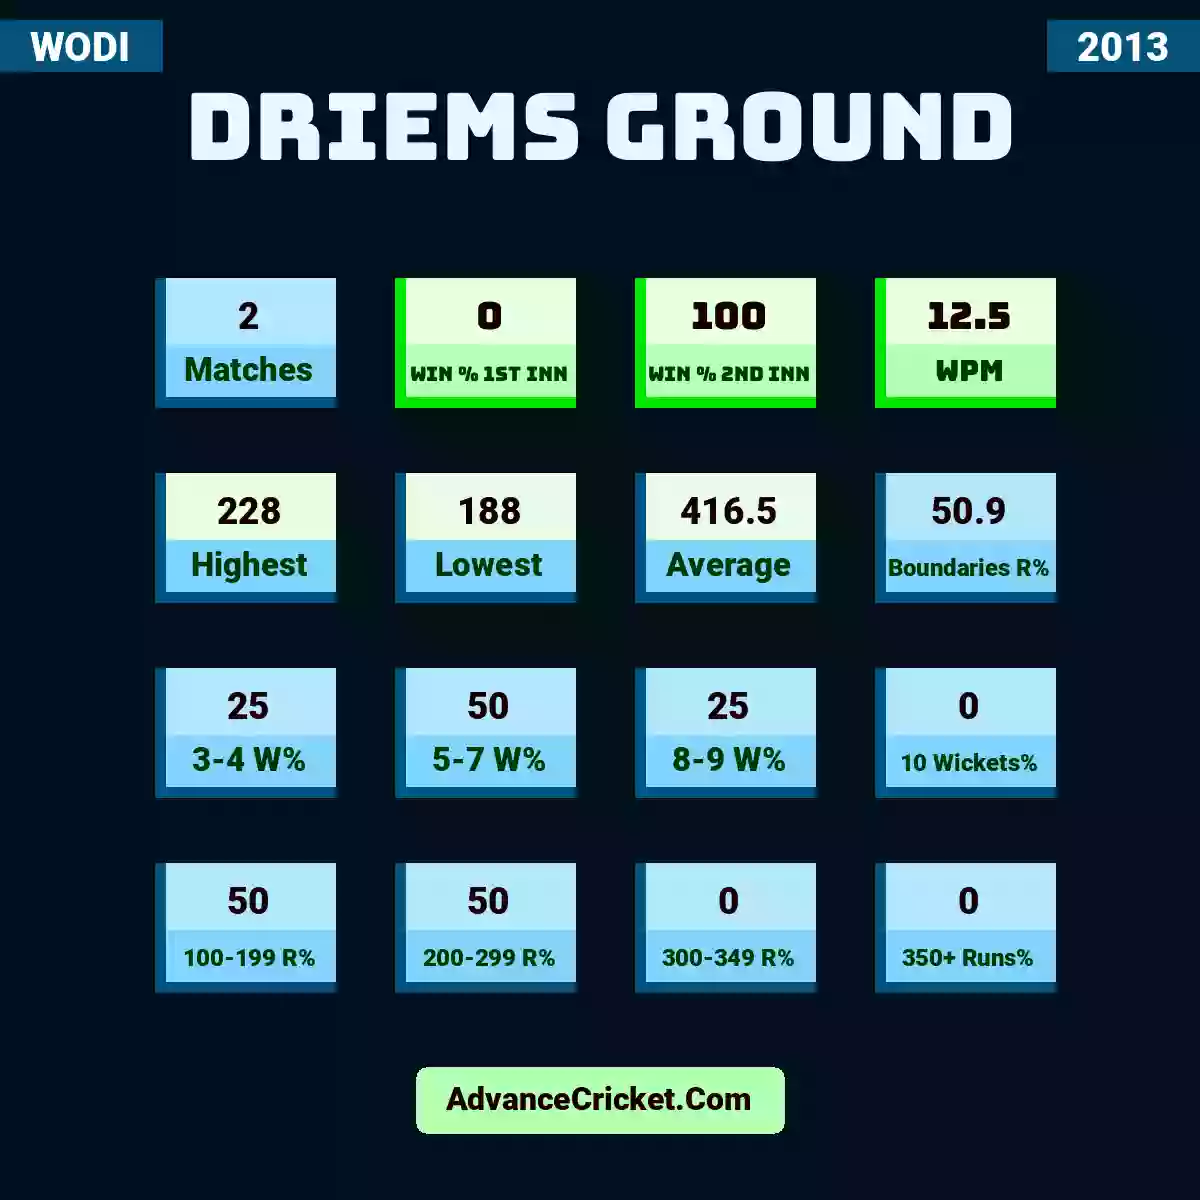 Image showing DRIEMS Ground with Matches: 2, Win % 1st Inn: 0, Win % 2nd Inn: 100, WPM: 12.5, Highest: 228, Lowest: 188, Average: 416.5, Boundaries R%: 50.9, 3-4 W%: 25, 5-7 W%: 50, 8-9 W%: 25, 10 Wickets%: 0, 100-199 R%: 50, 200-299 R%: 50, 300-349 R%: 0, 350+ Runs%: 0.